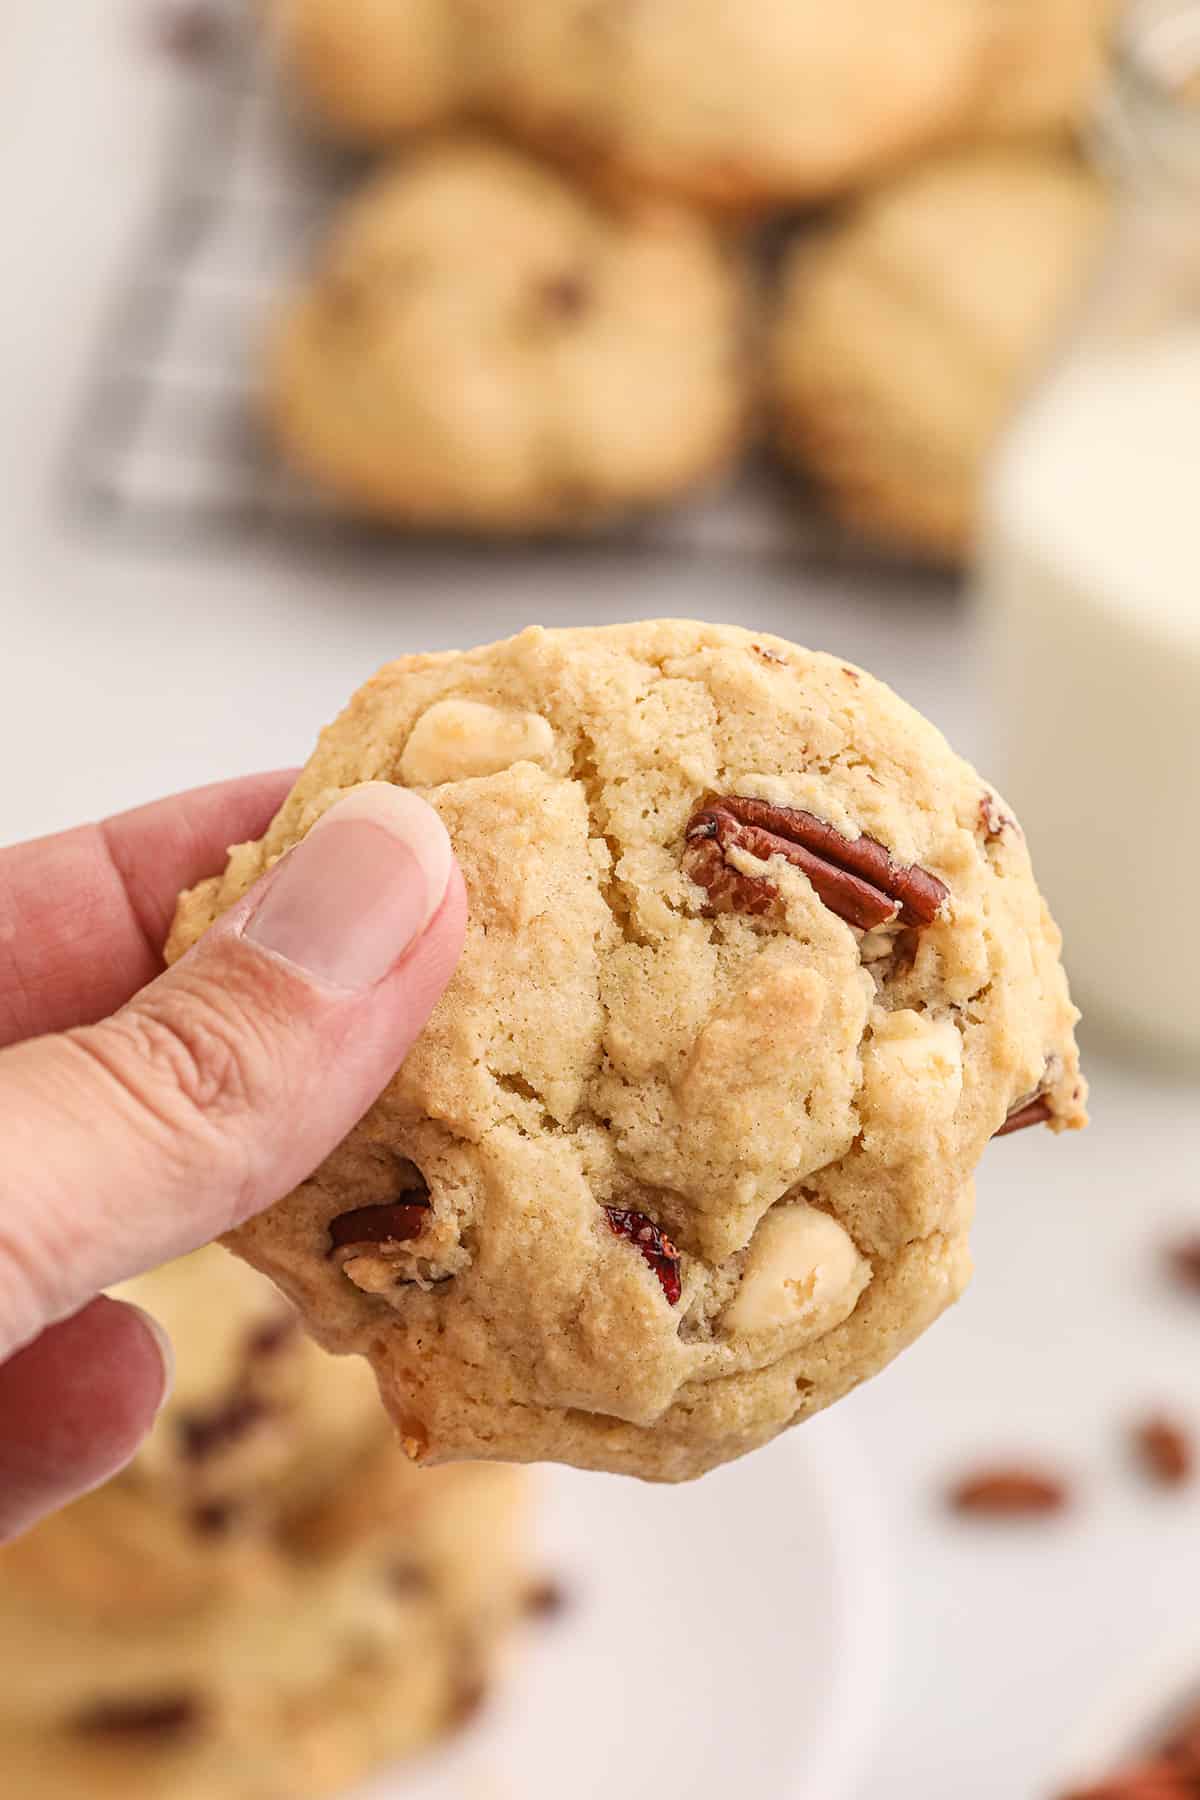 A cranberry pecan cookie held in a person's hand.